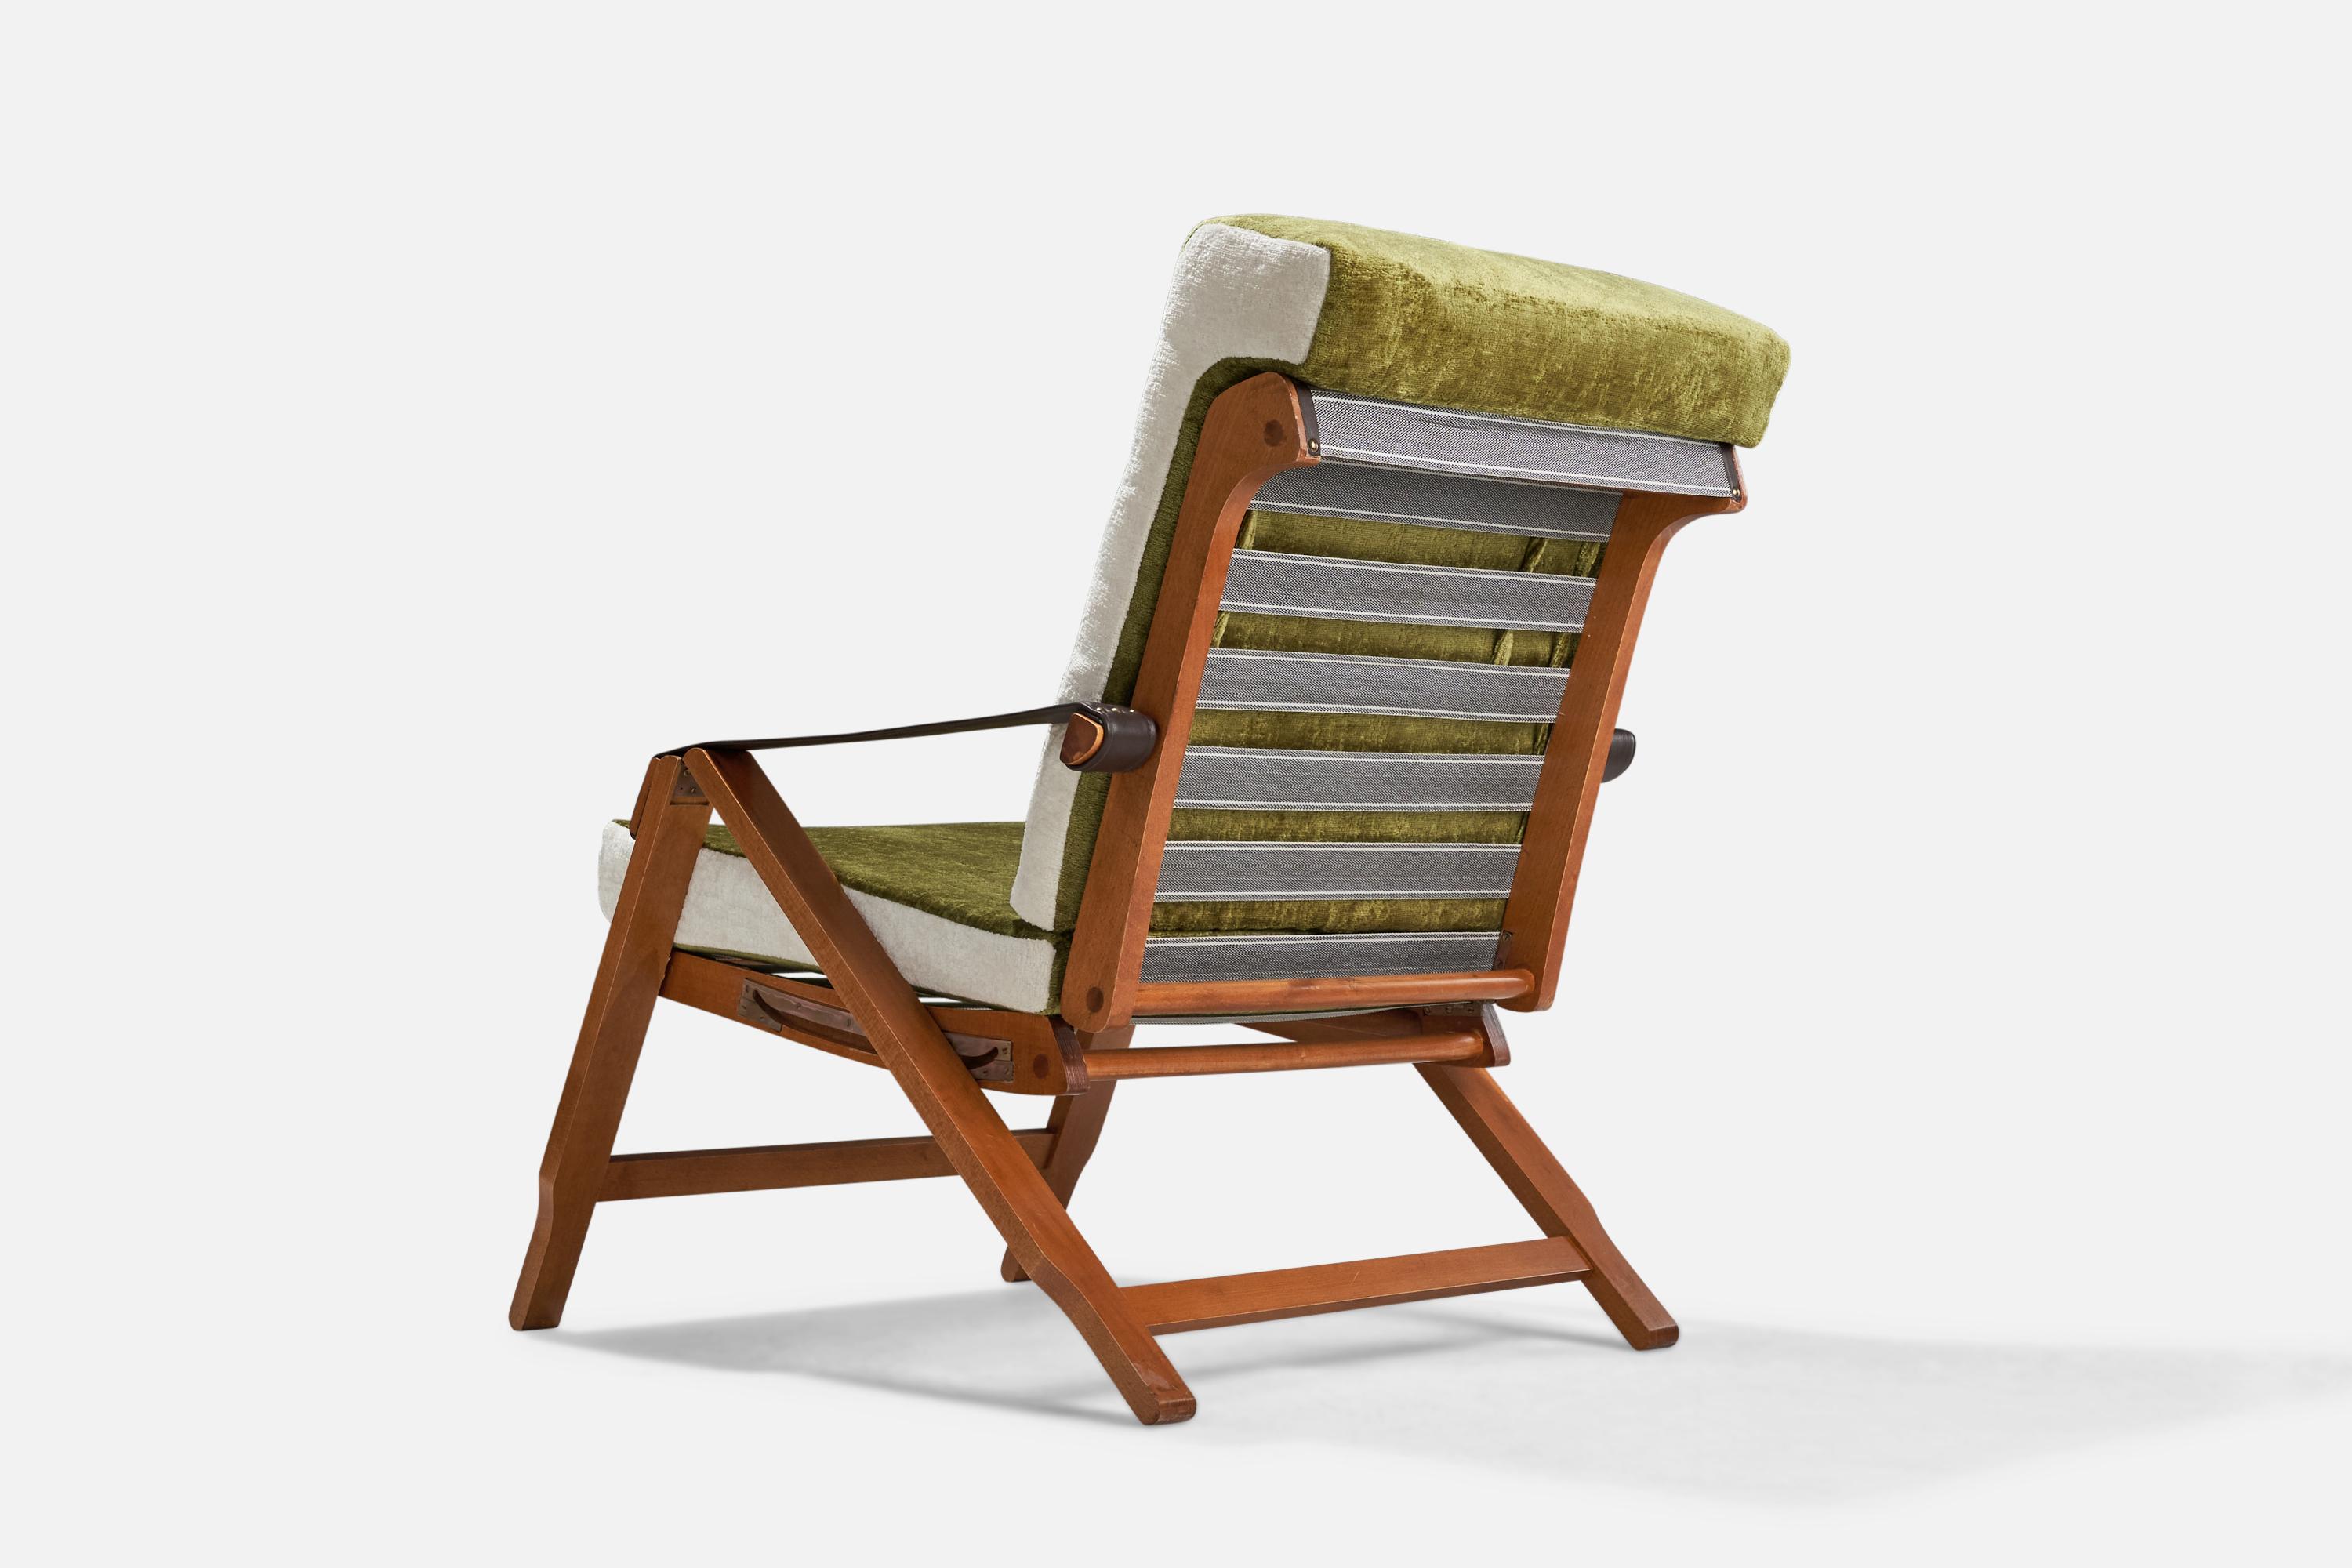 Italian Marco Zanuso, Rare Lounge Chairs, Beech, Leather, Brass, Velvet, Italy, 1960s For Sale